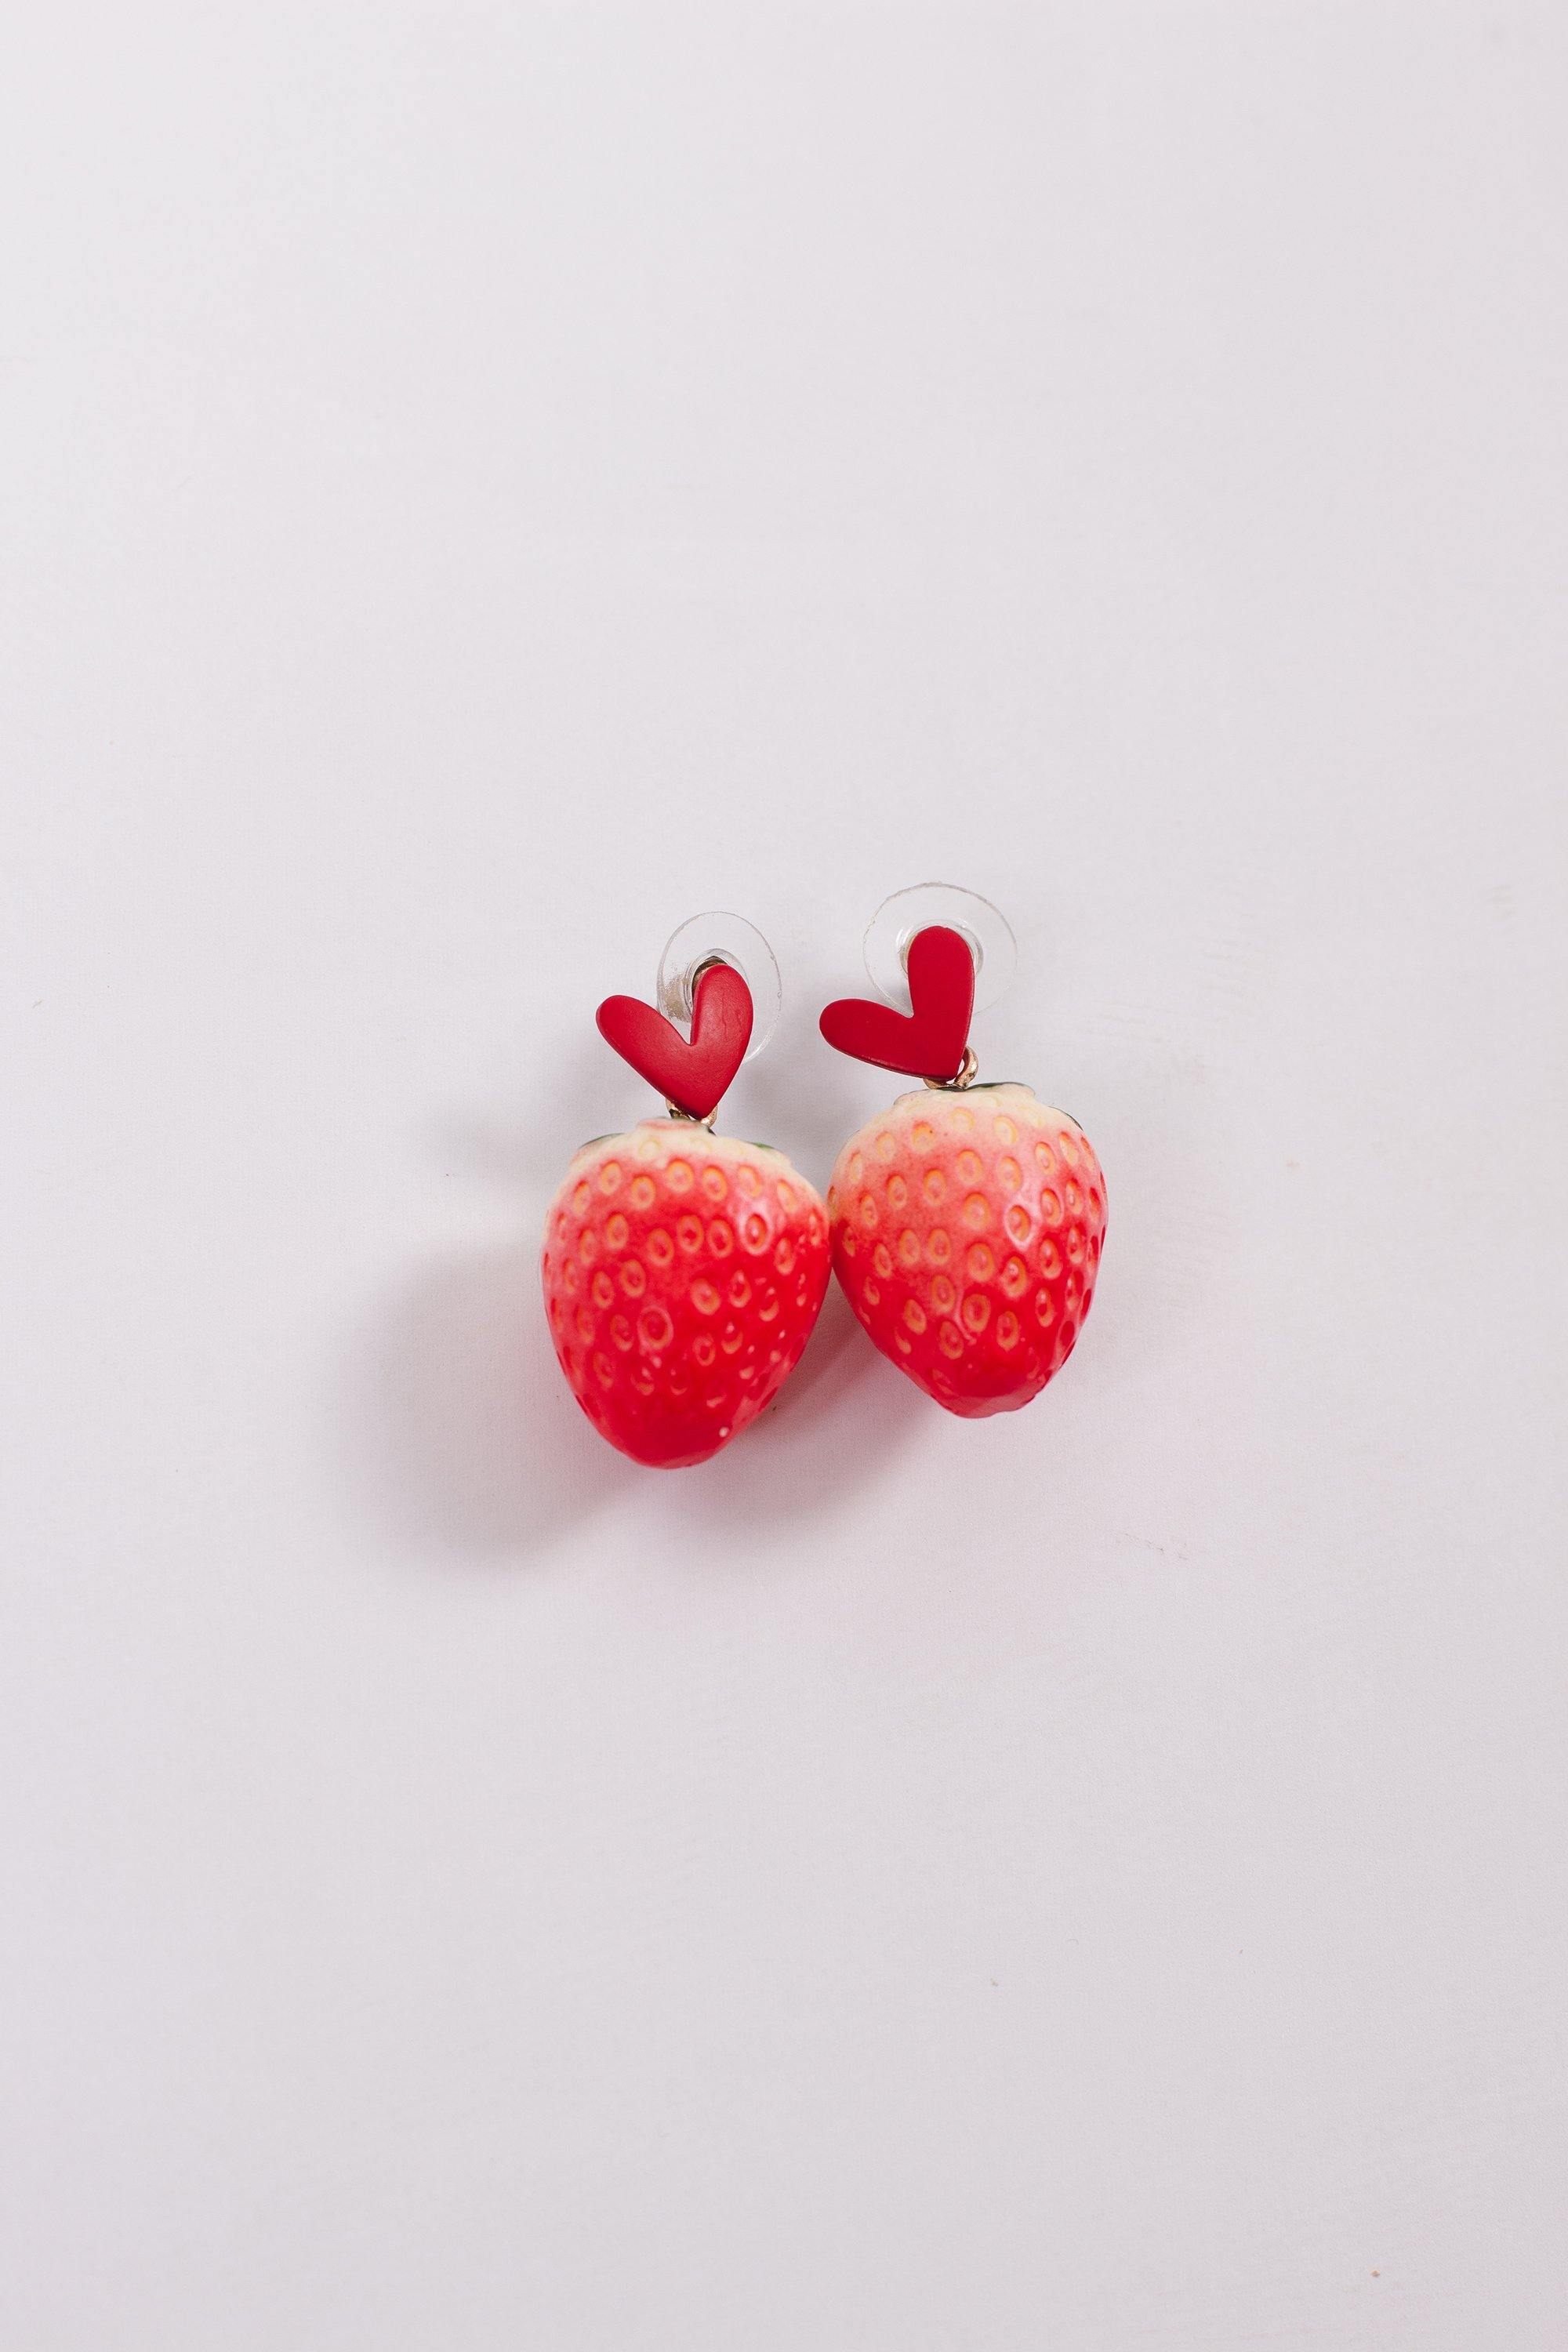 Louis Vuitton, Jewelry, Auth Louis Vuitton Heart Red Strawberry Earrings